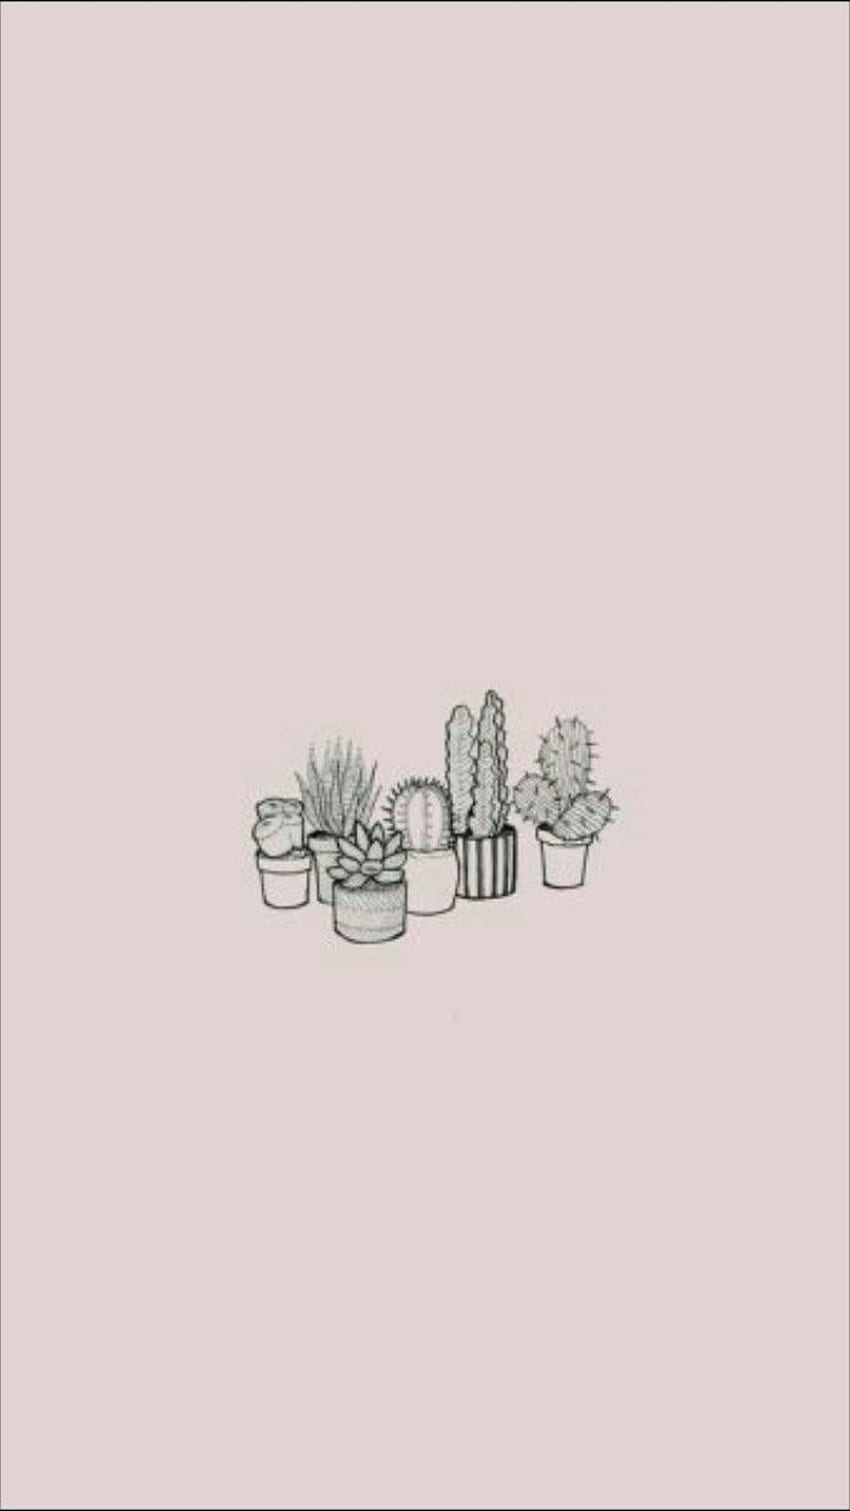 A drawing of cactus plants in pots - Cactus